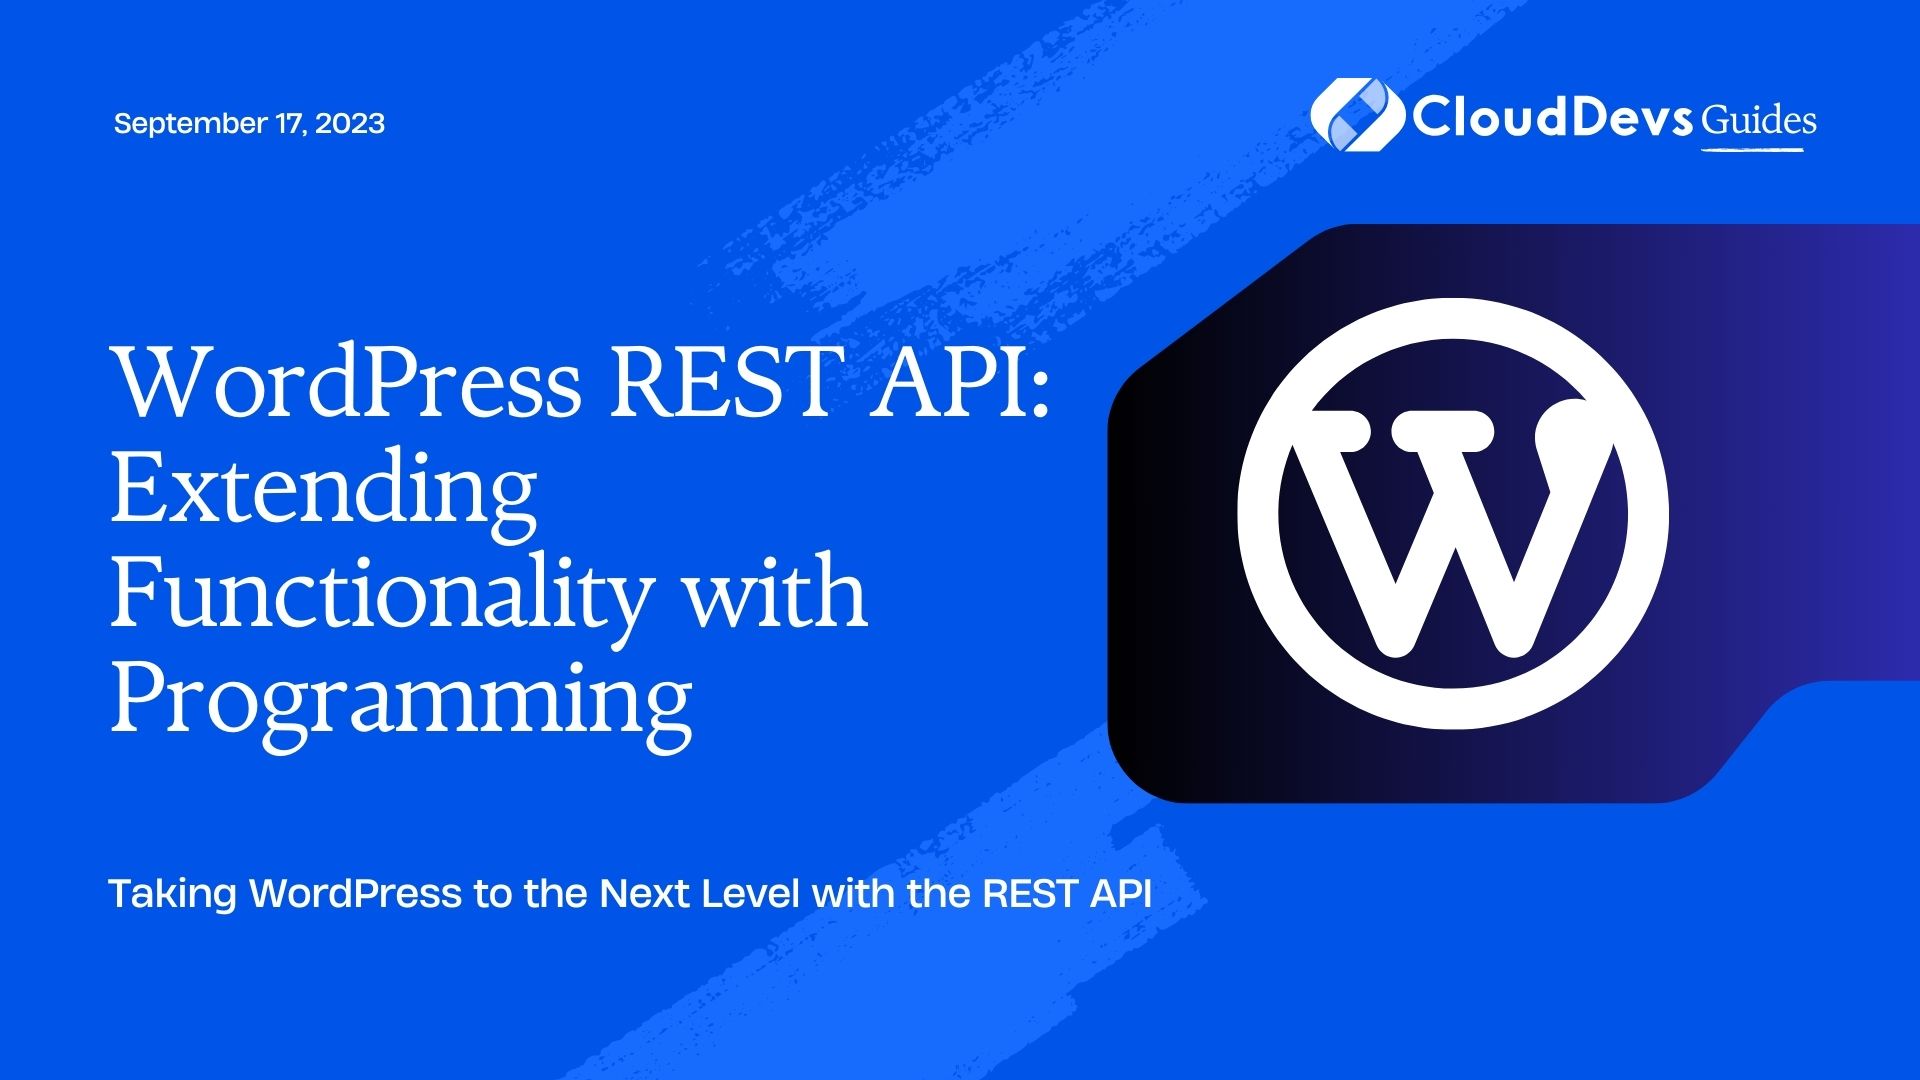 WordPress REST API: Extending Functionality with Programming